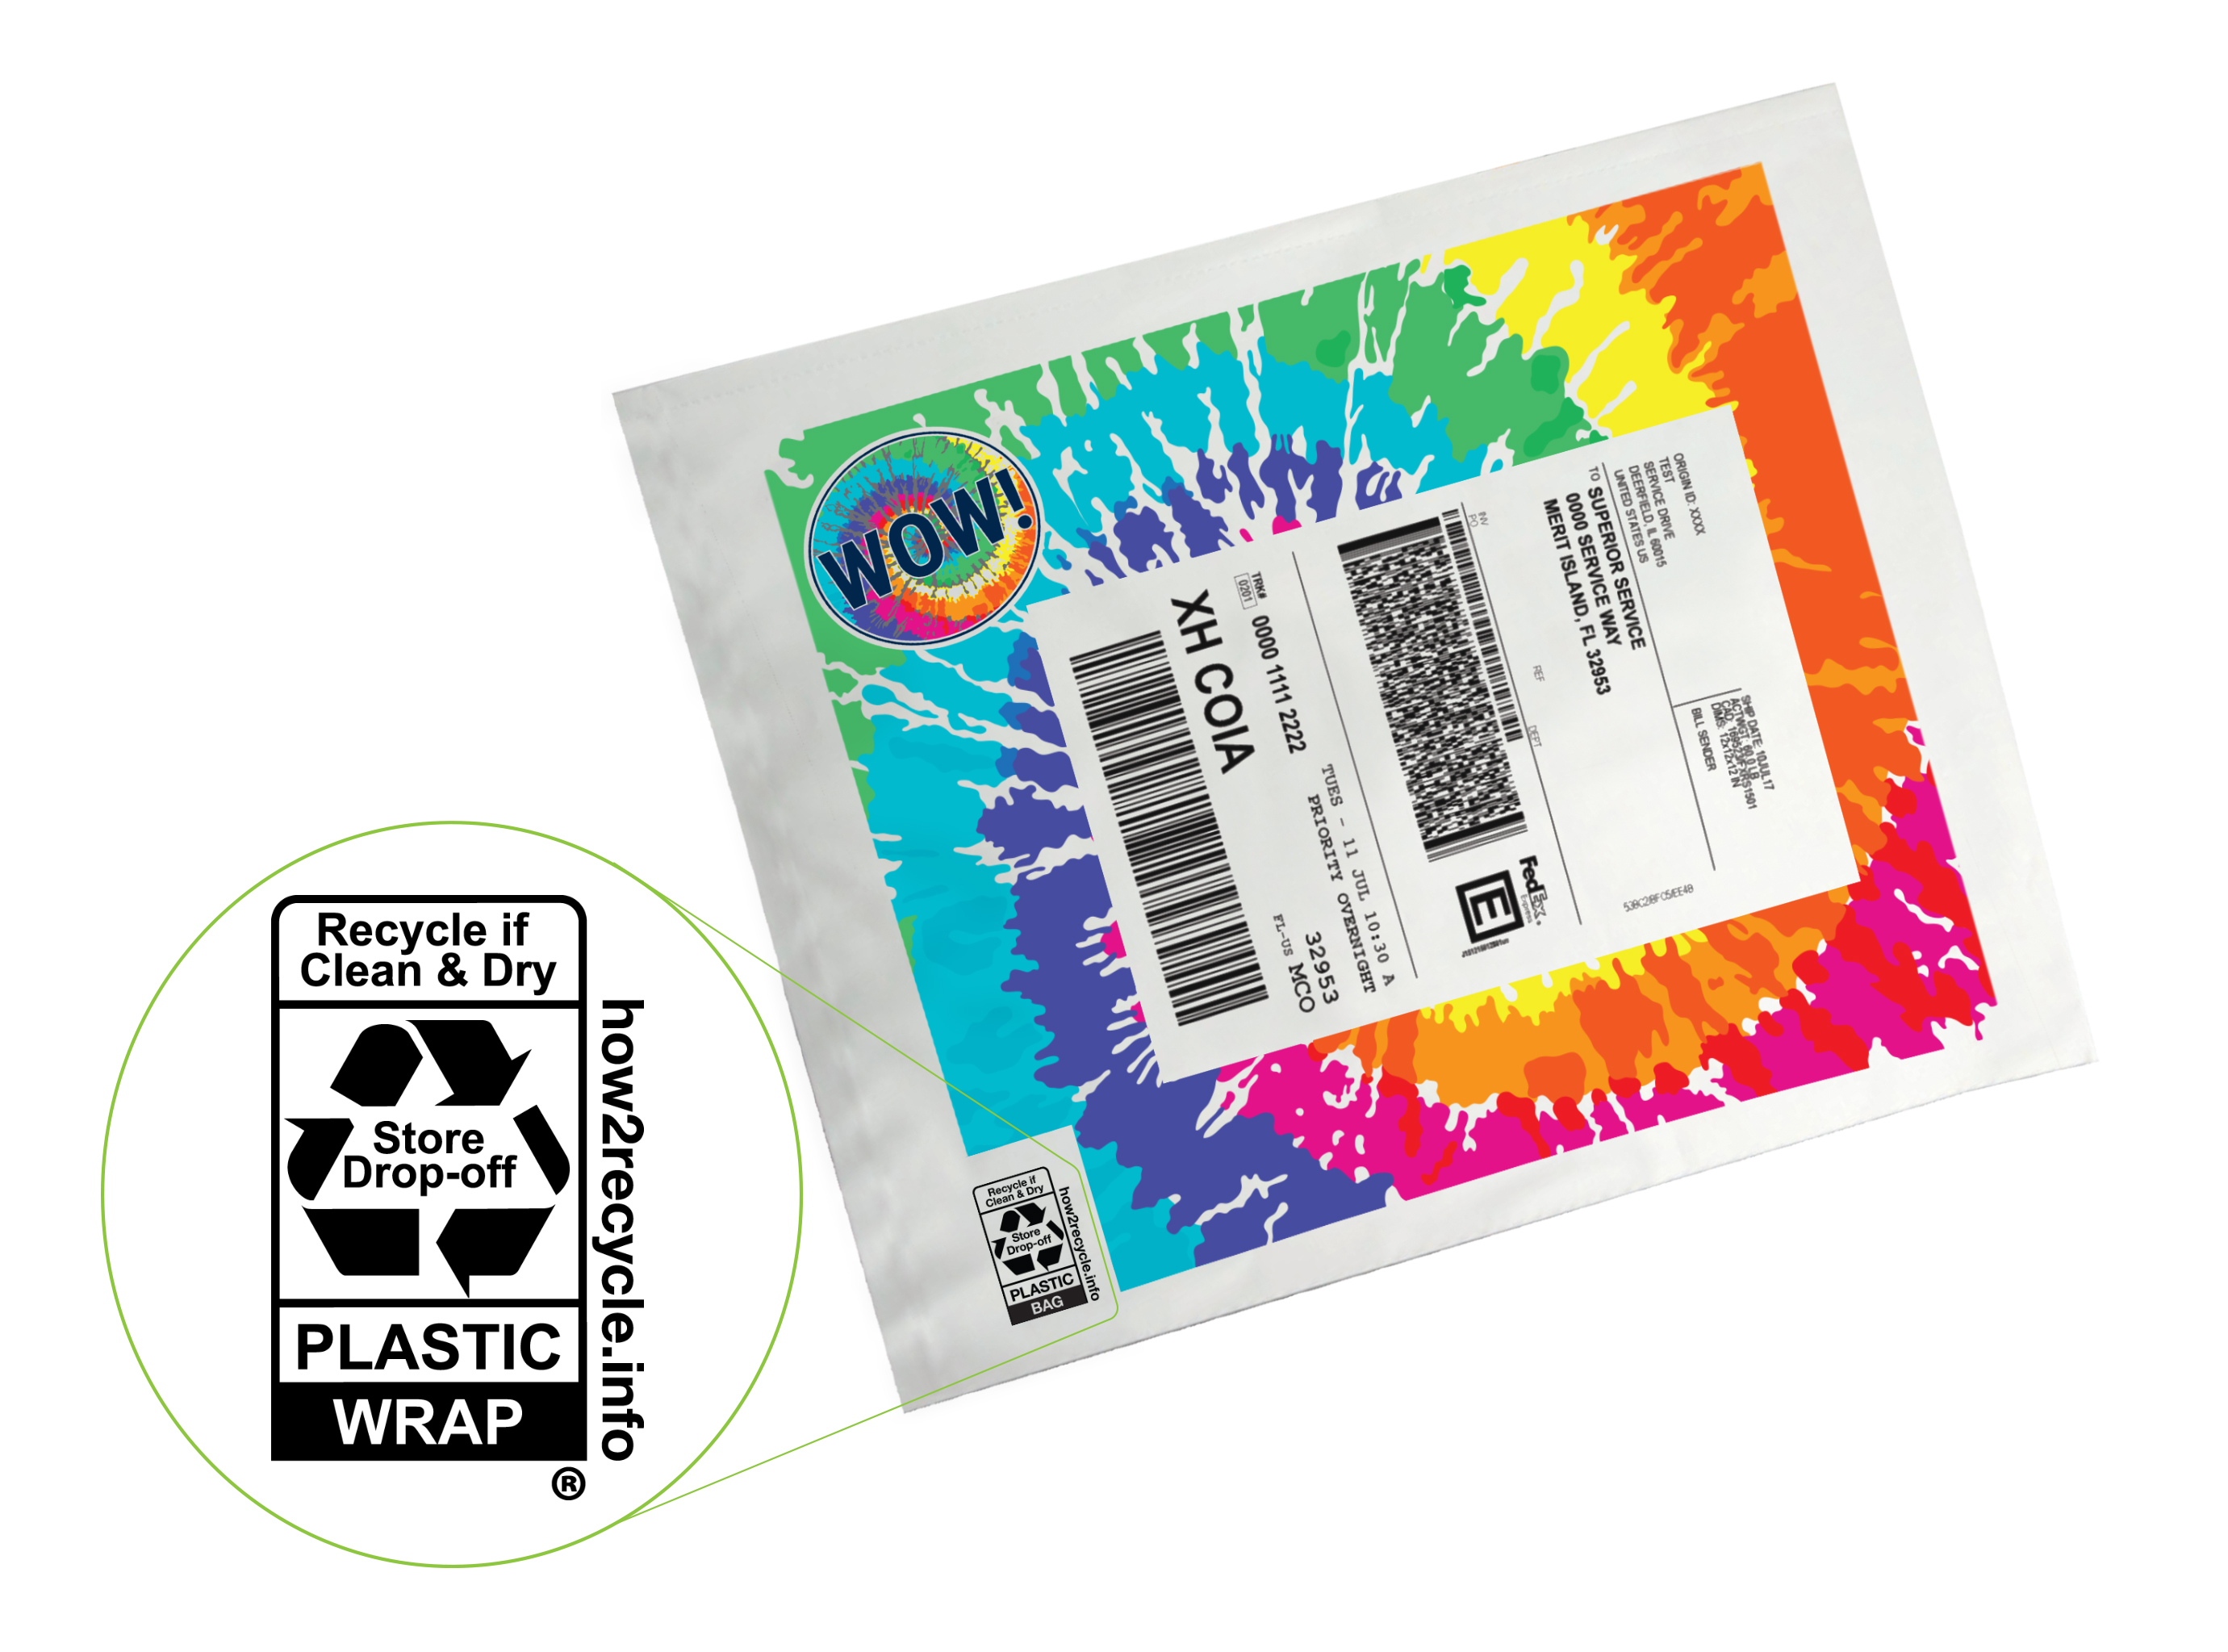 How2Recycle logo is shown on a Pregis Sharp Poly Bag.